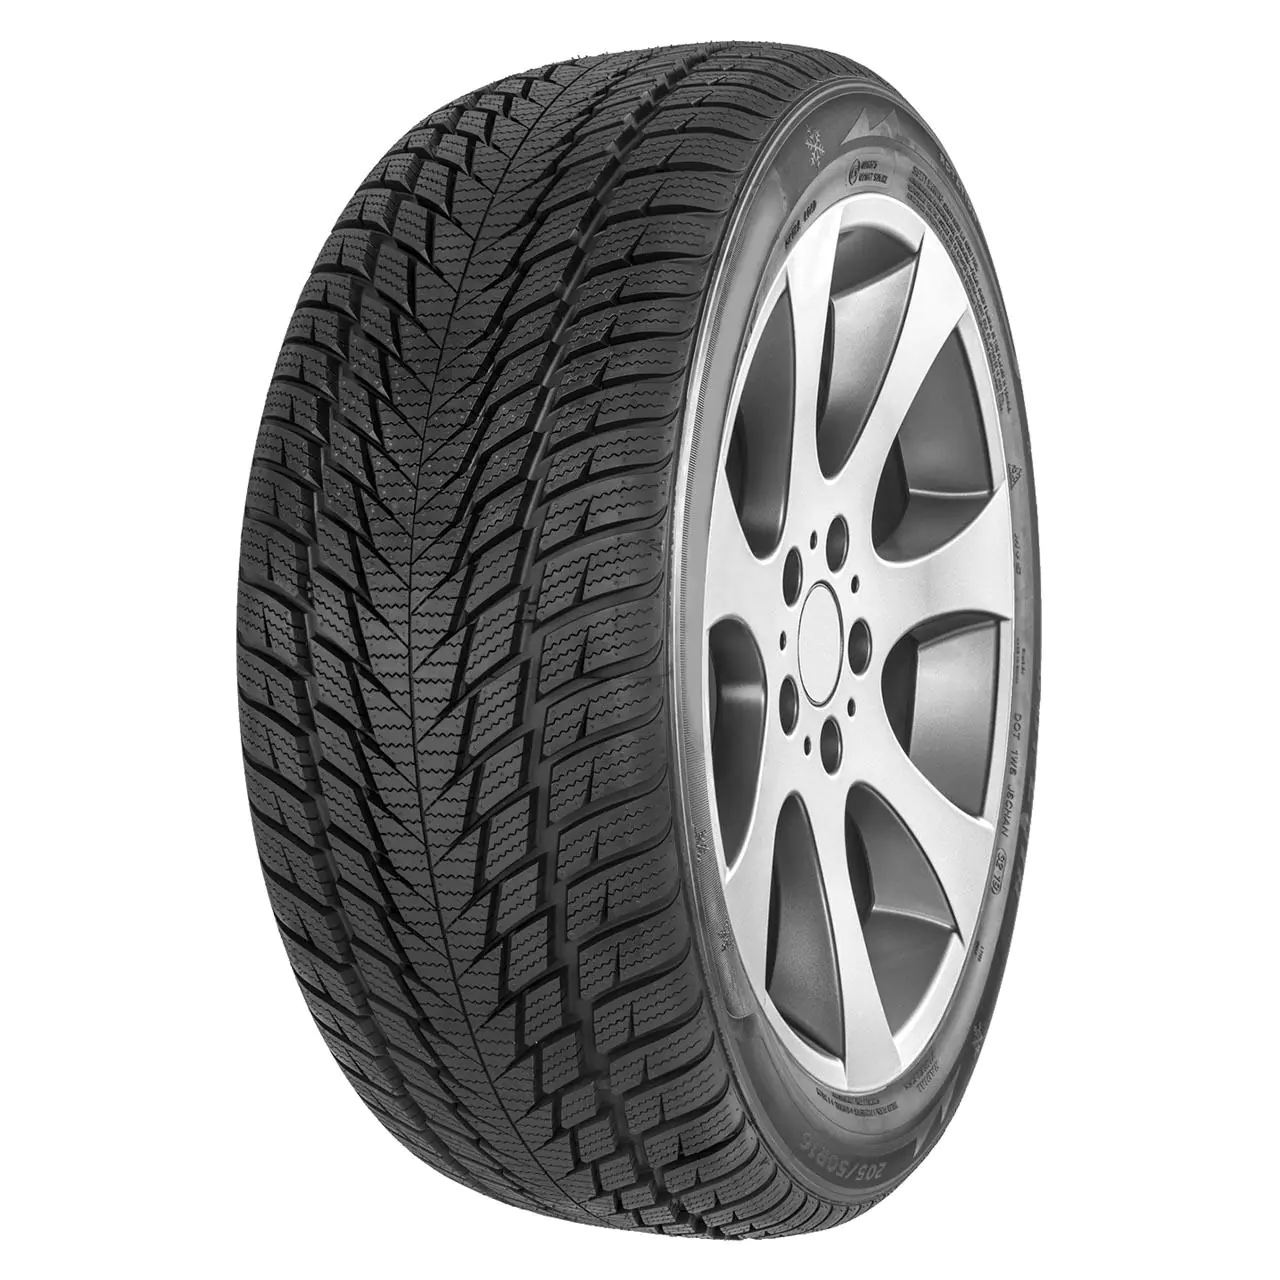 Gomme Autovettura Fortuna 255/40 R19 100V GOWIN UHP2 XL M+S Invernale